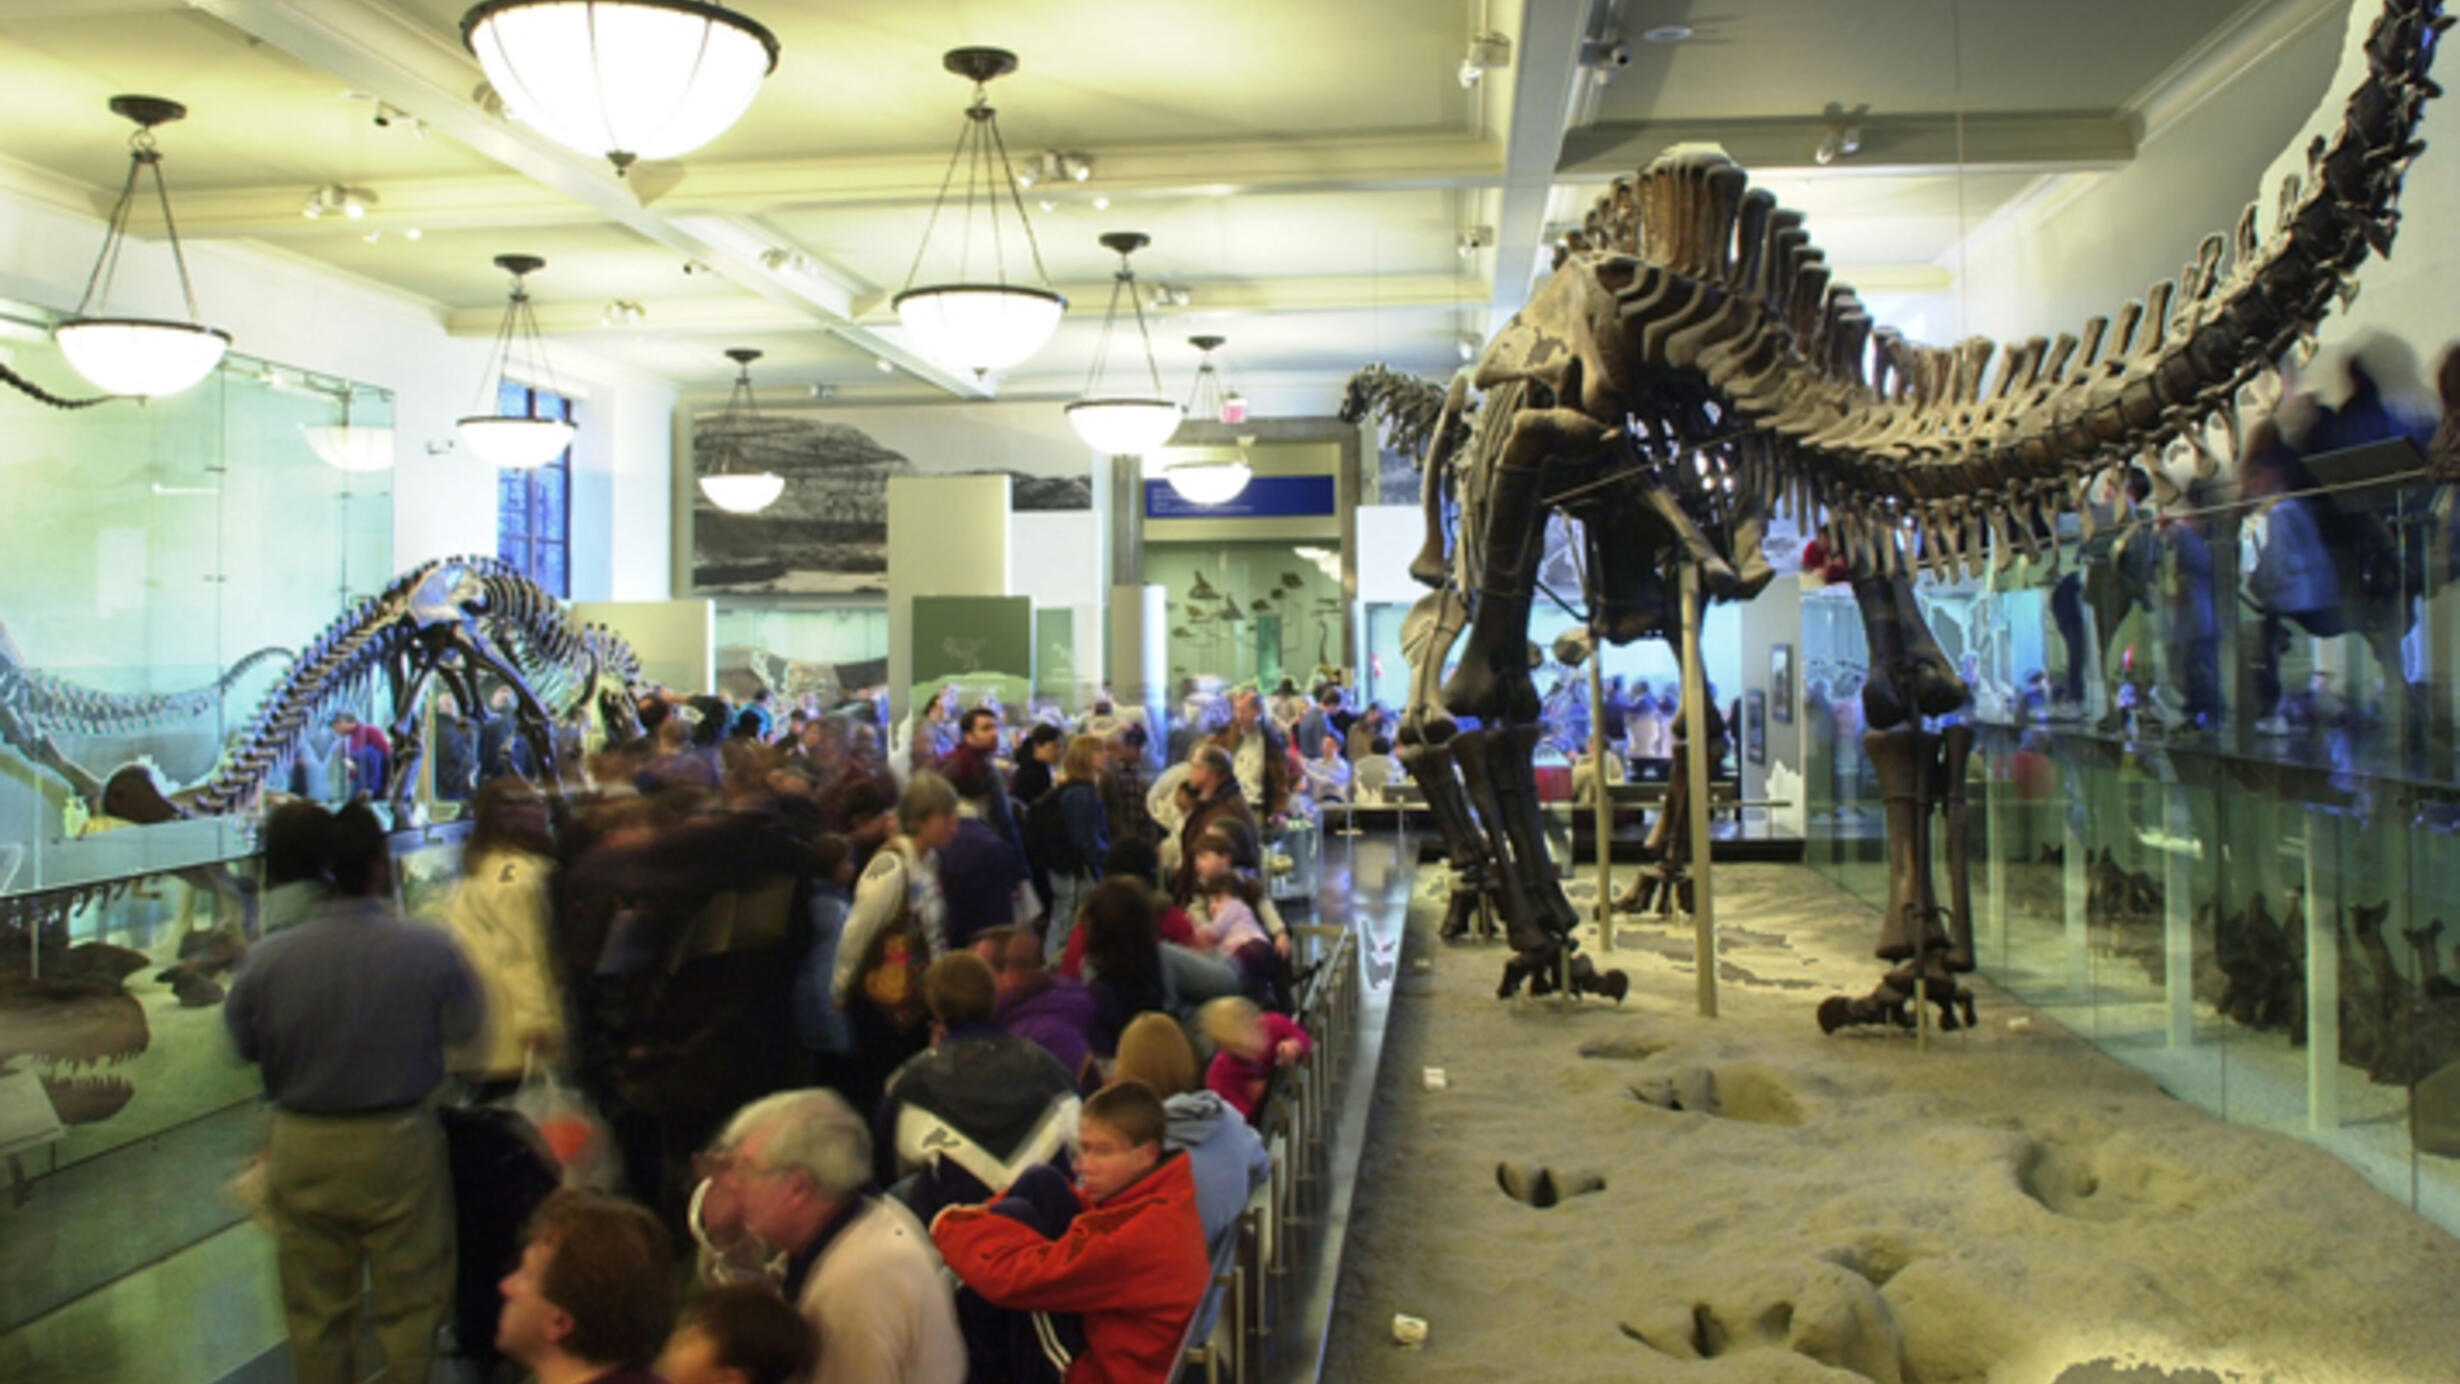 A large crowd of visitors in the Museum's Hall of Saurischian Dinosaurs is dwarfed by the massive Apatosaurus skeleton shown with fossilized footprints.